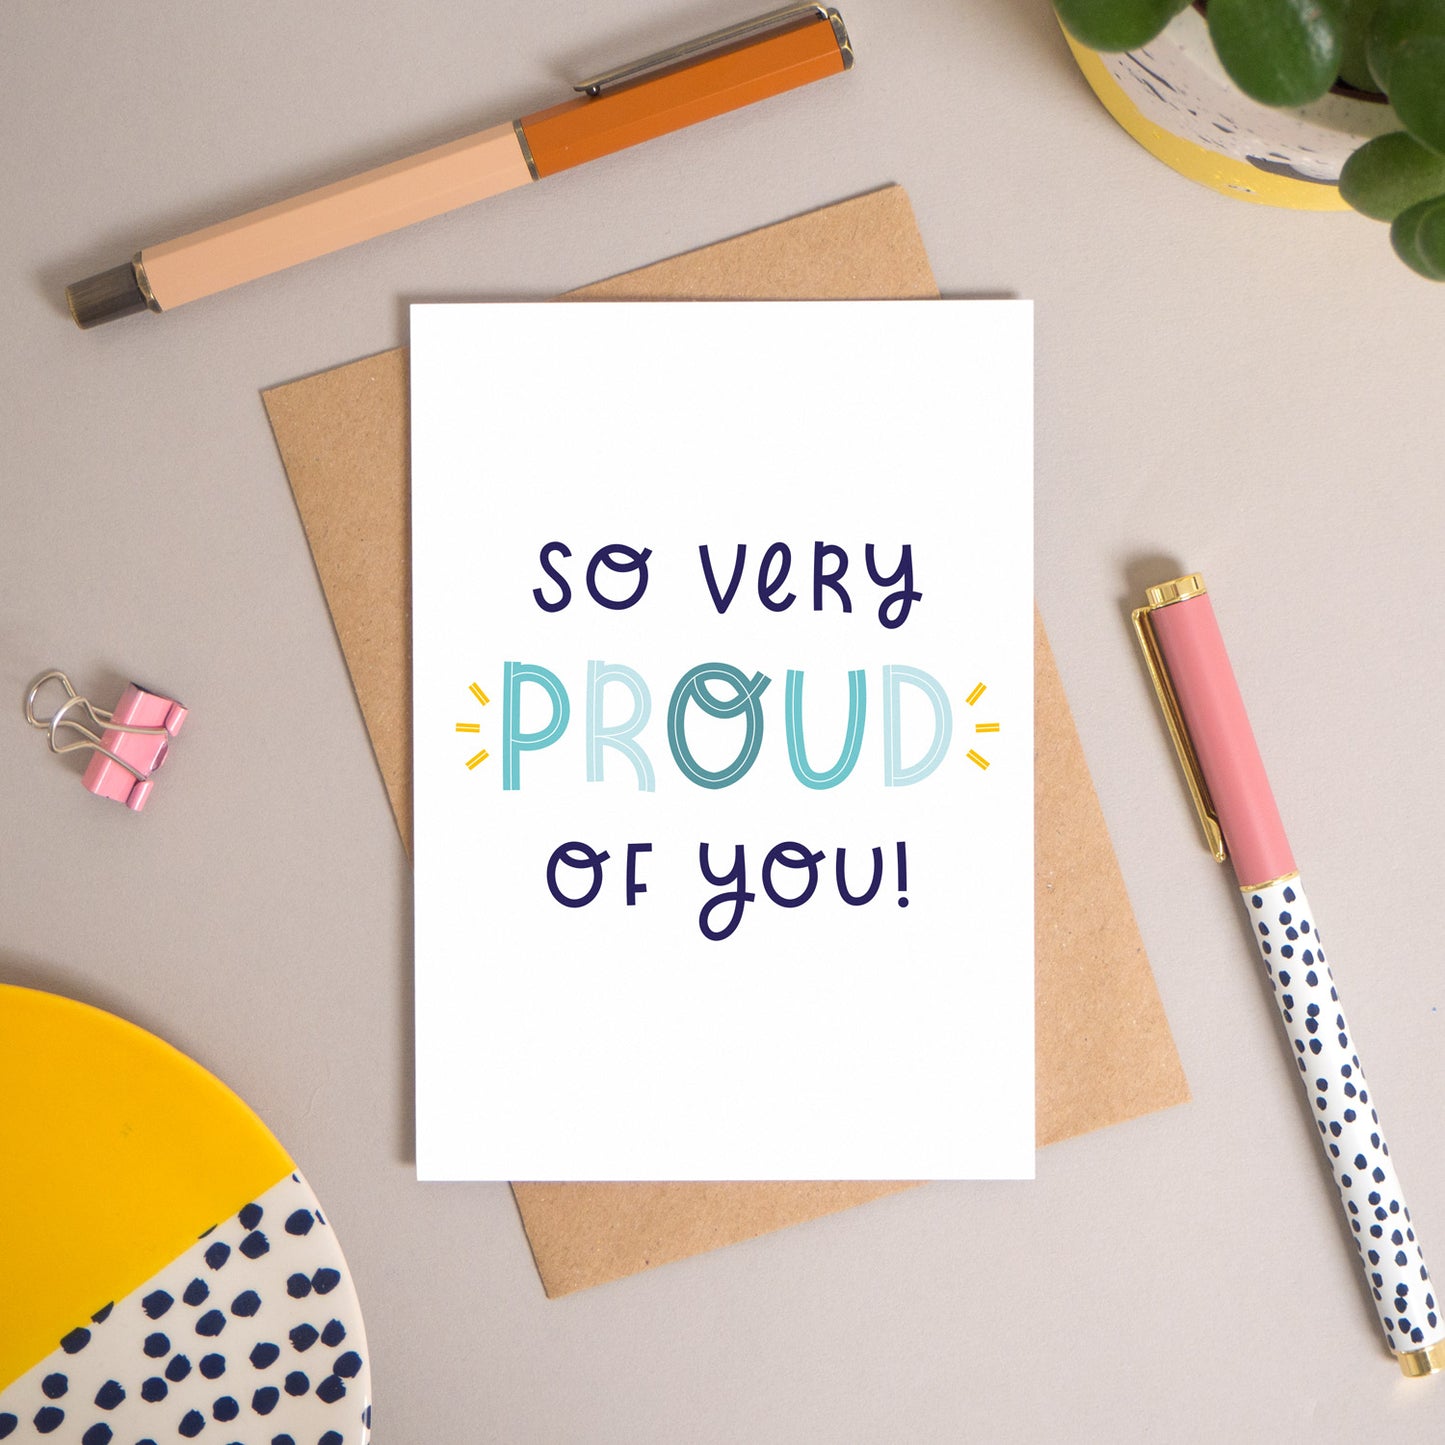 This ‘so very proud of you’ card has been shot flatlay style looking directly over the top of the card. It is lying flat on it’s kraft brown envelope, on a warm grey background. Surrounding the card are pens, a clip, a plant and a trinket dish. This version of the card is in varying tones of navy and blue.